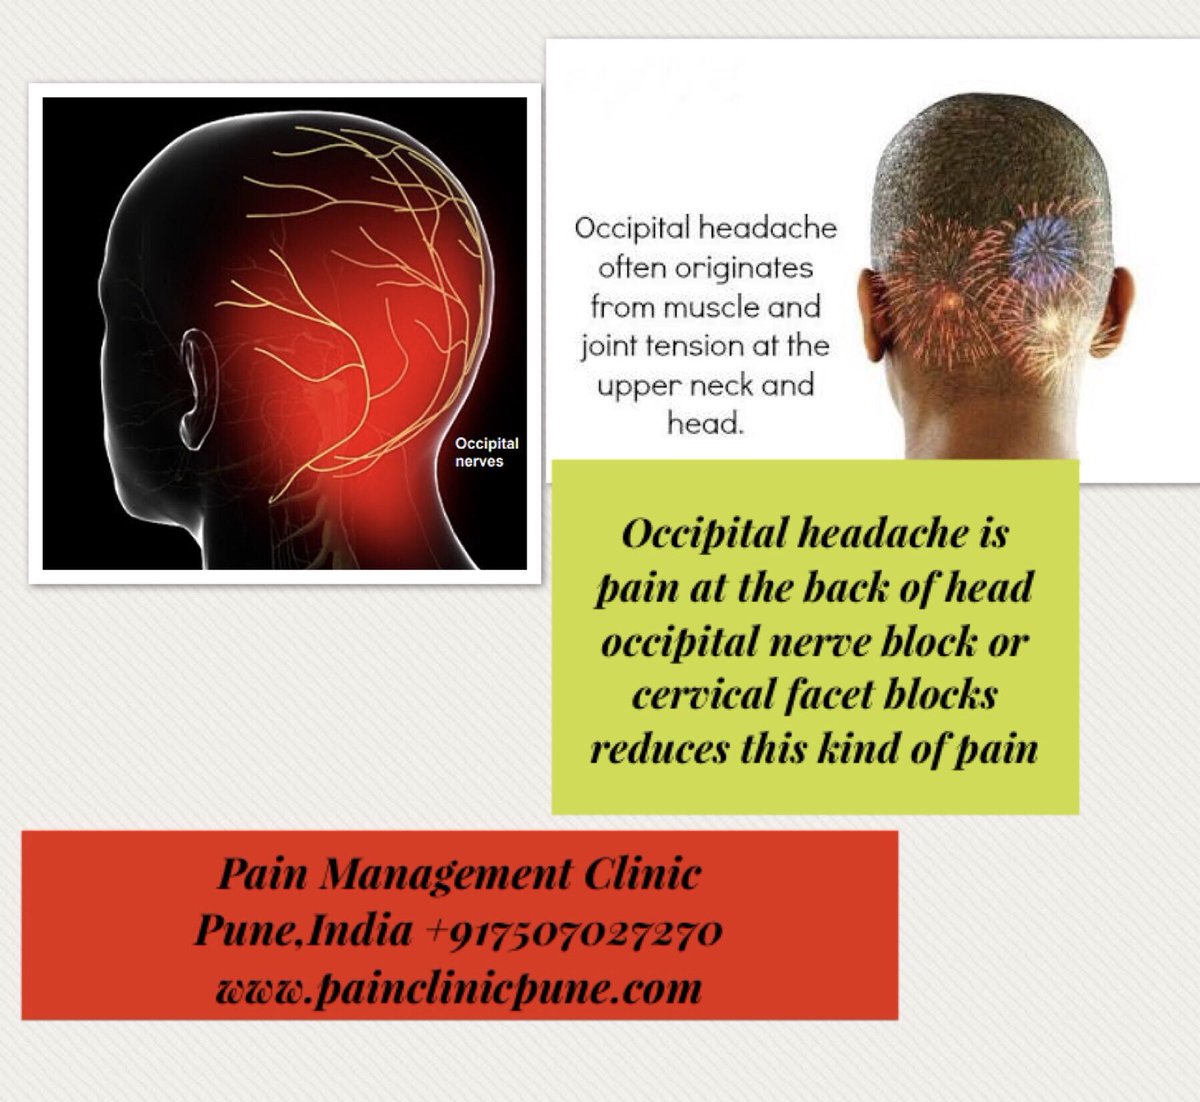 Occipital neuralgia ,pain usually at the back of the head may be in upper part of the neck #headaches #occipitalneuralgia #ChronicPain #painrelief #painmanagement #painclinic #pune #india #bestpaindoctor #paintreatment #painclinicpune    Pain Management Clinic,+917507027270